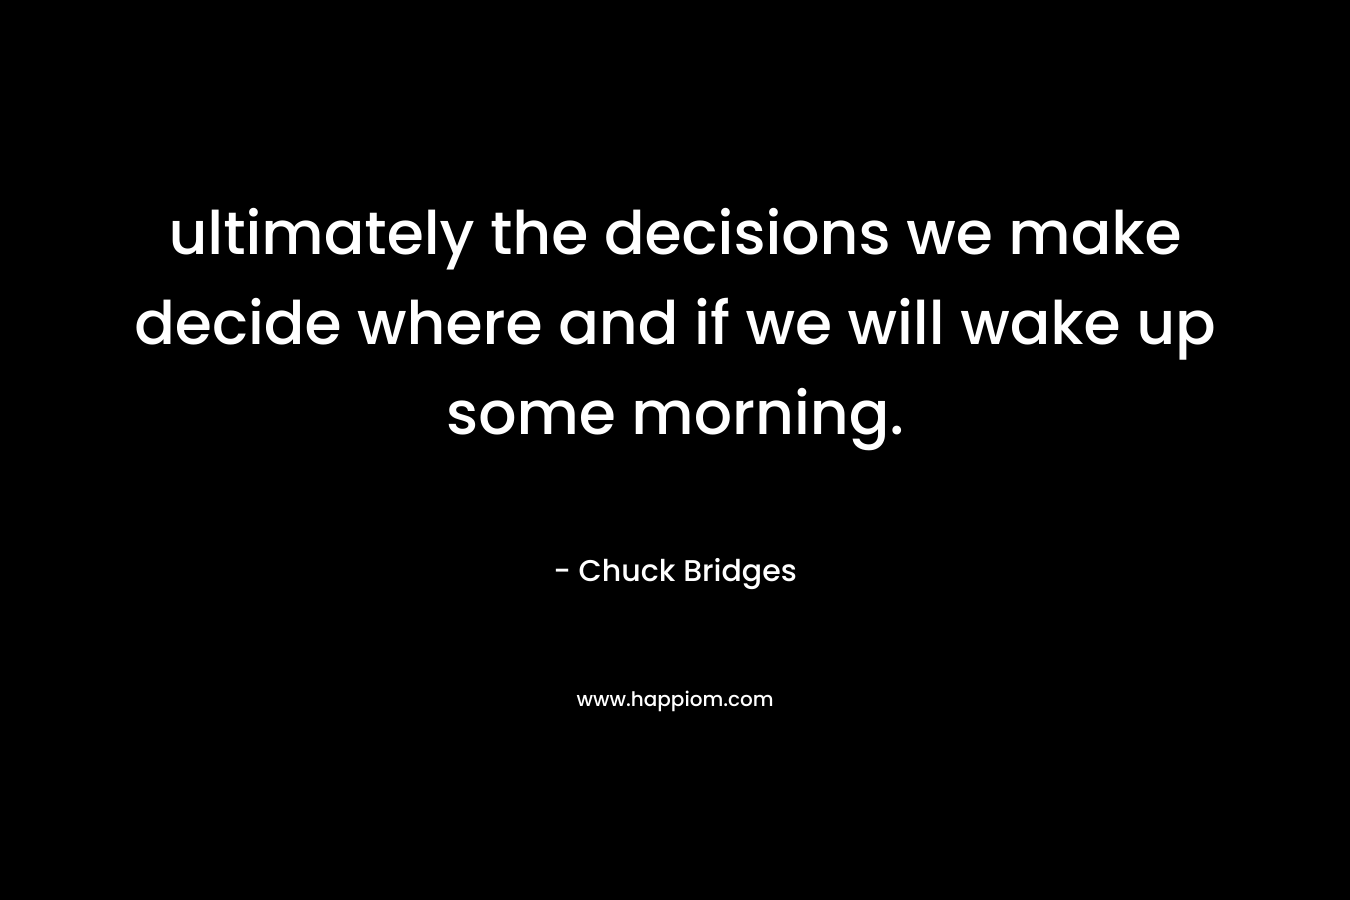 ultimately the decisions we make decide where and if we will wake up some morning. – Chuck Bridges